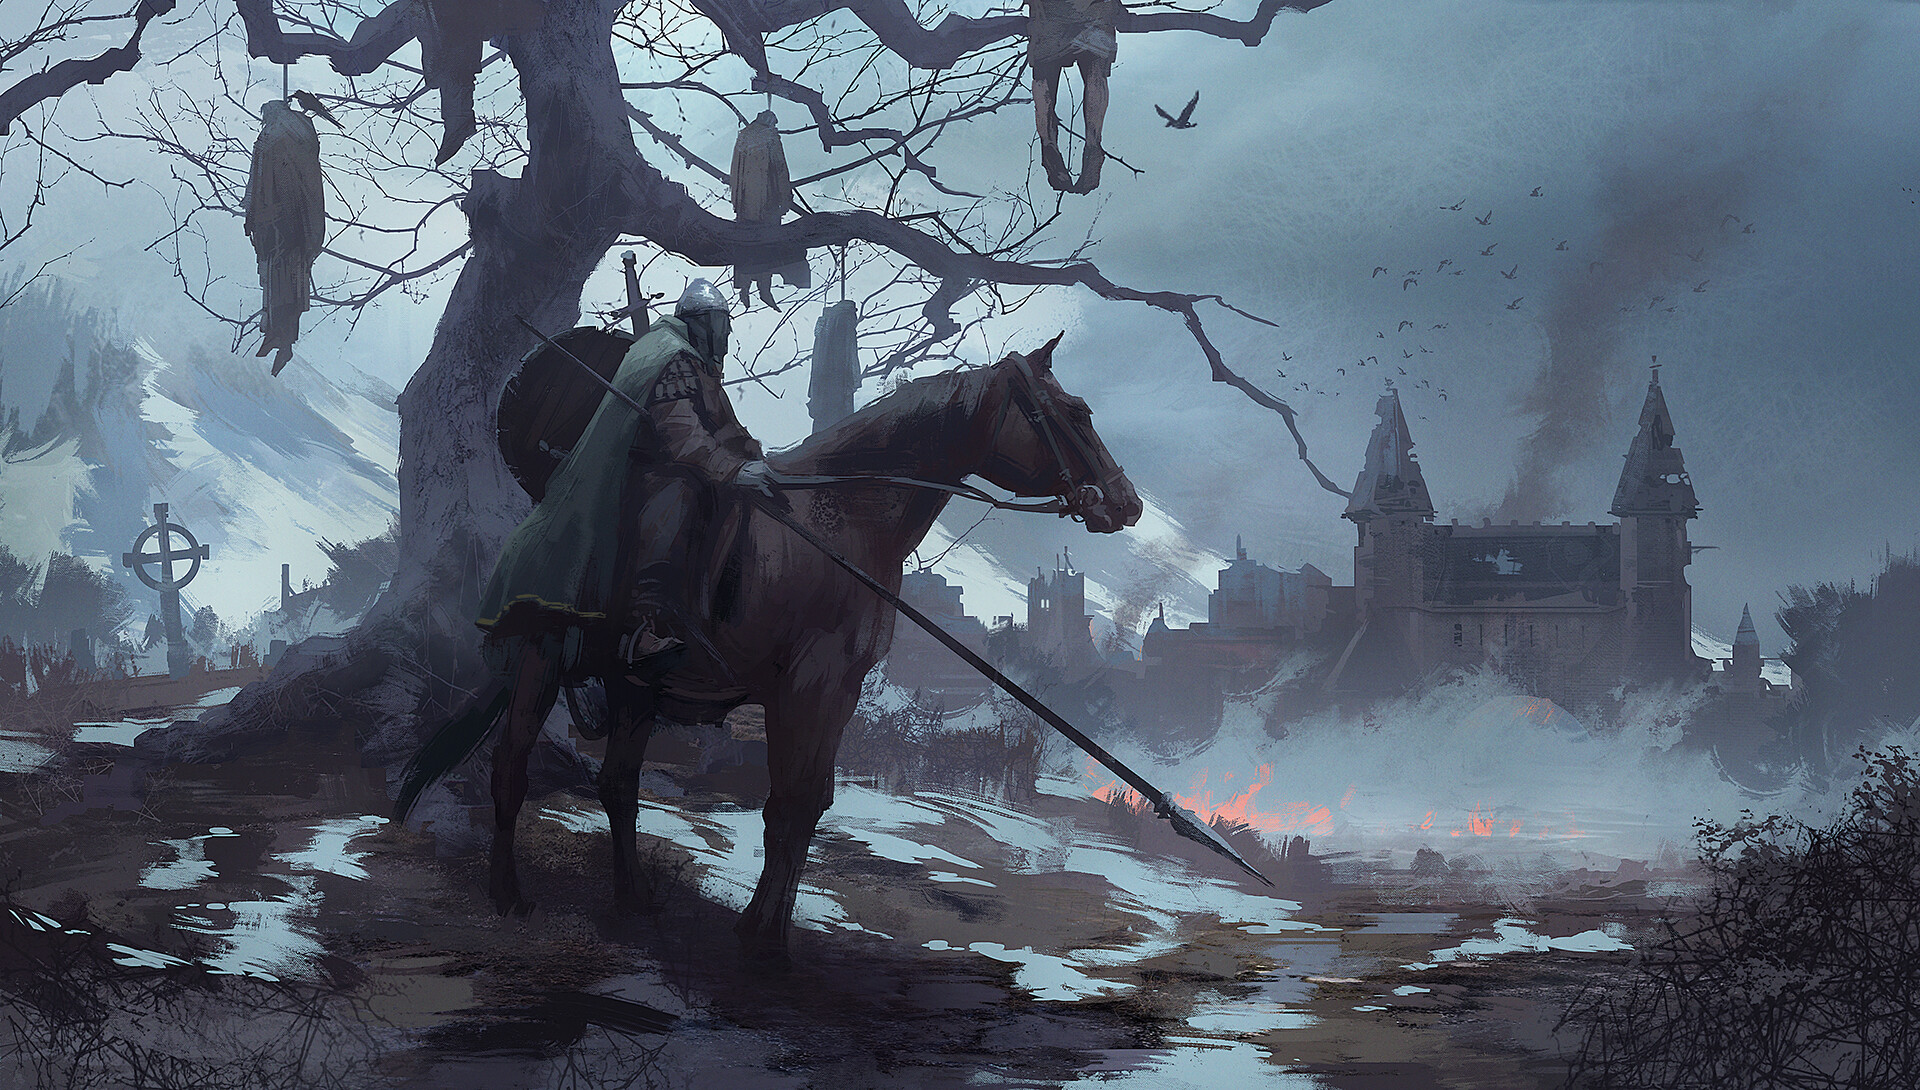 Medieval Artwork Knight Castle Corpse Horse 1920x1090